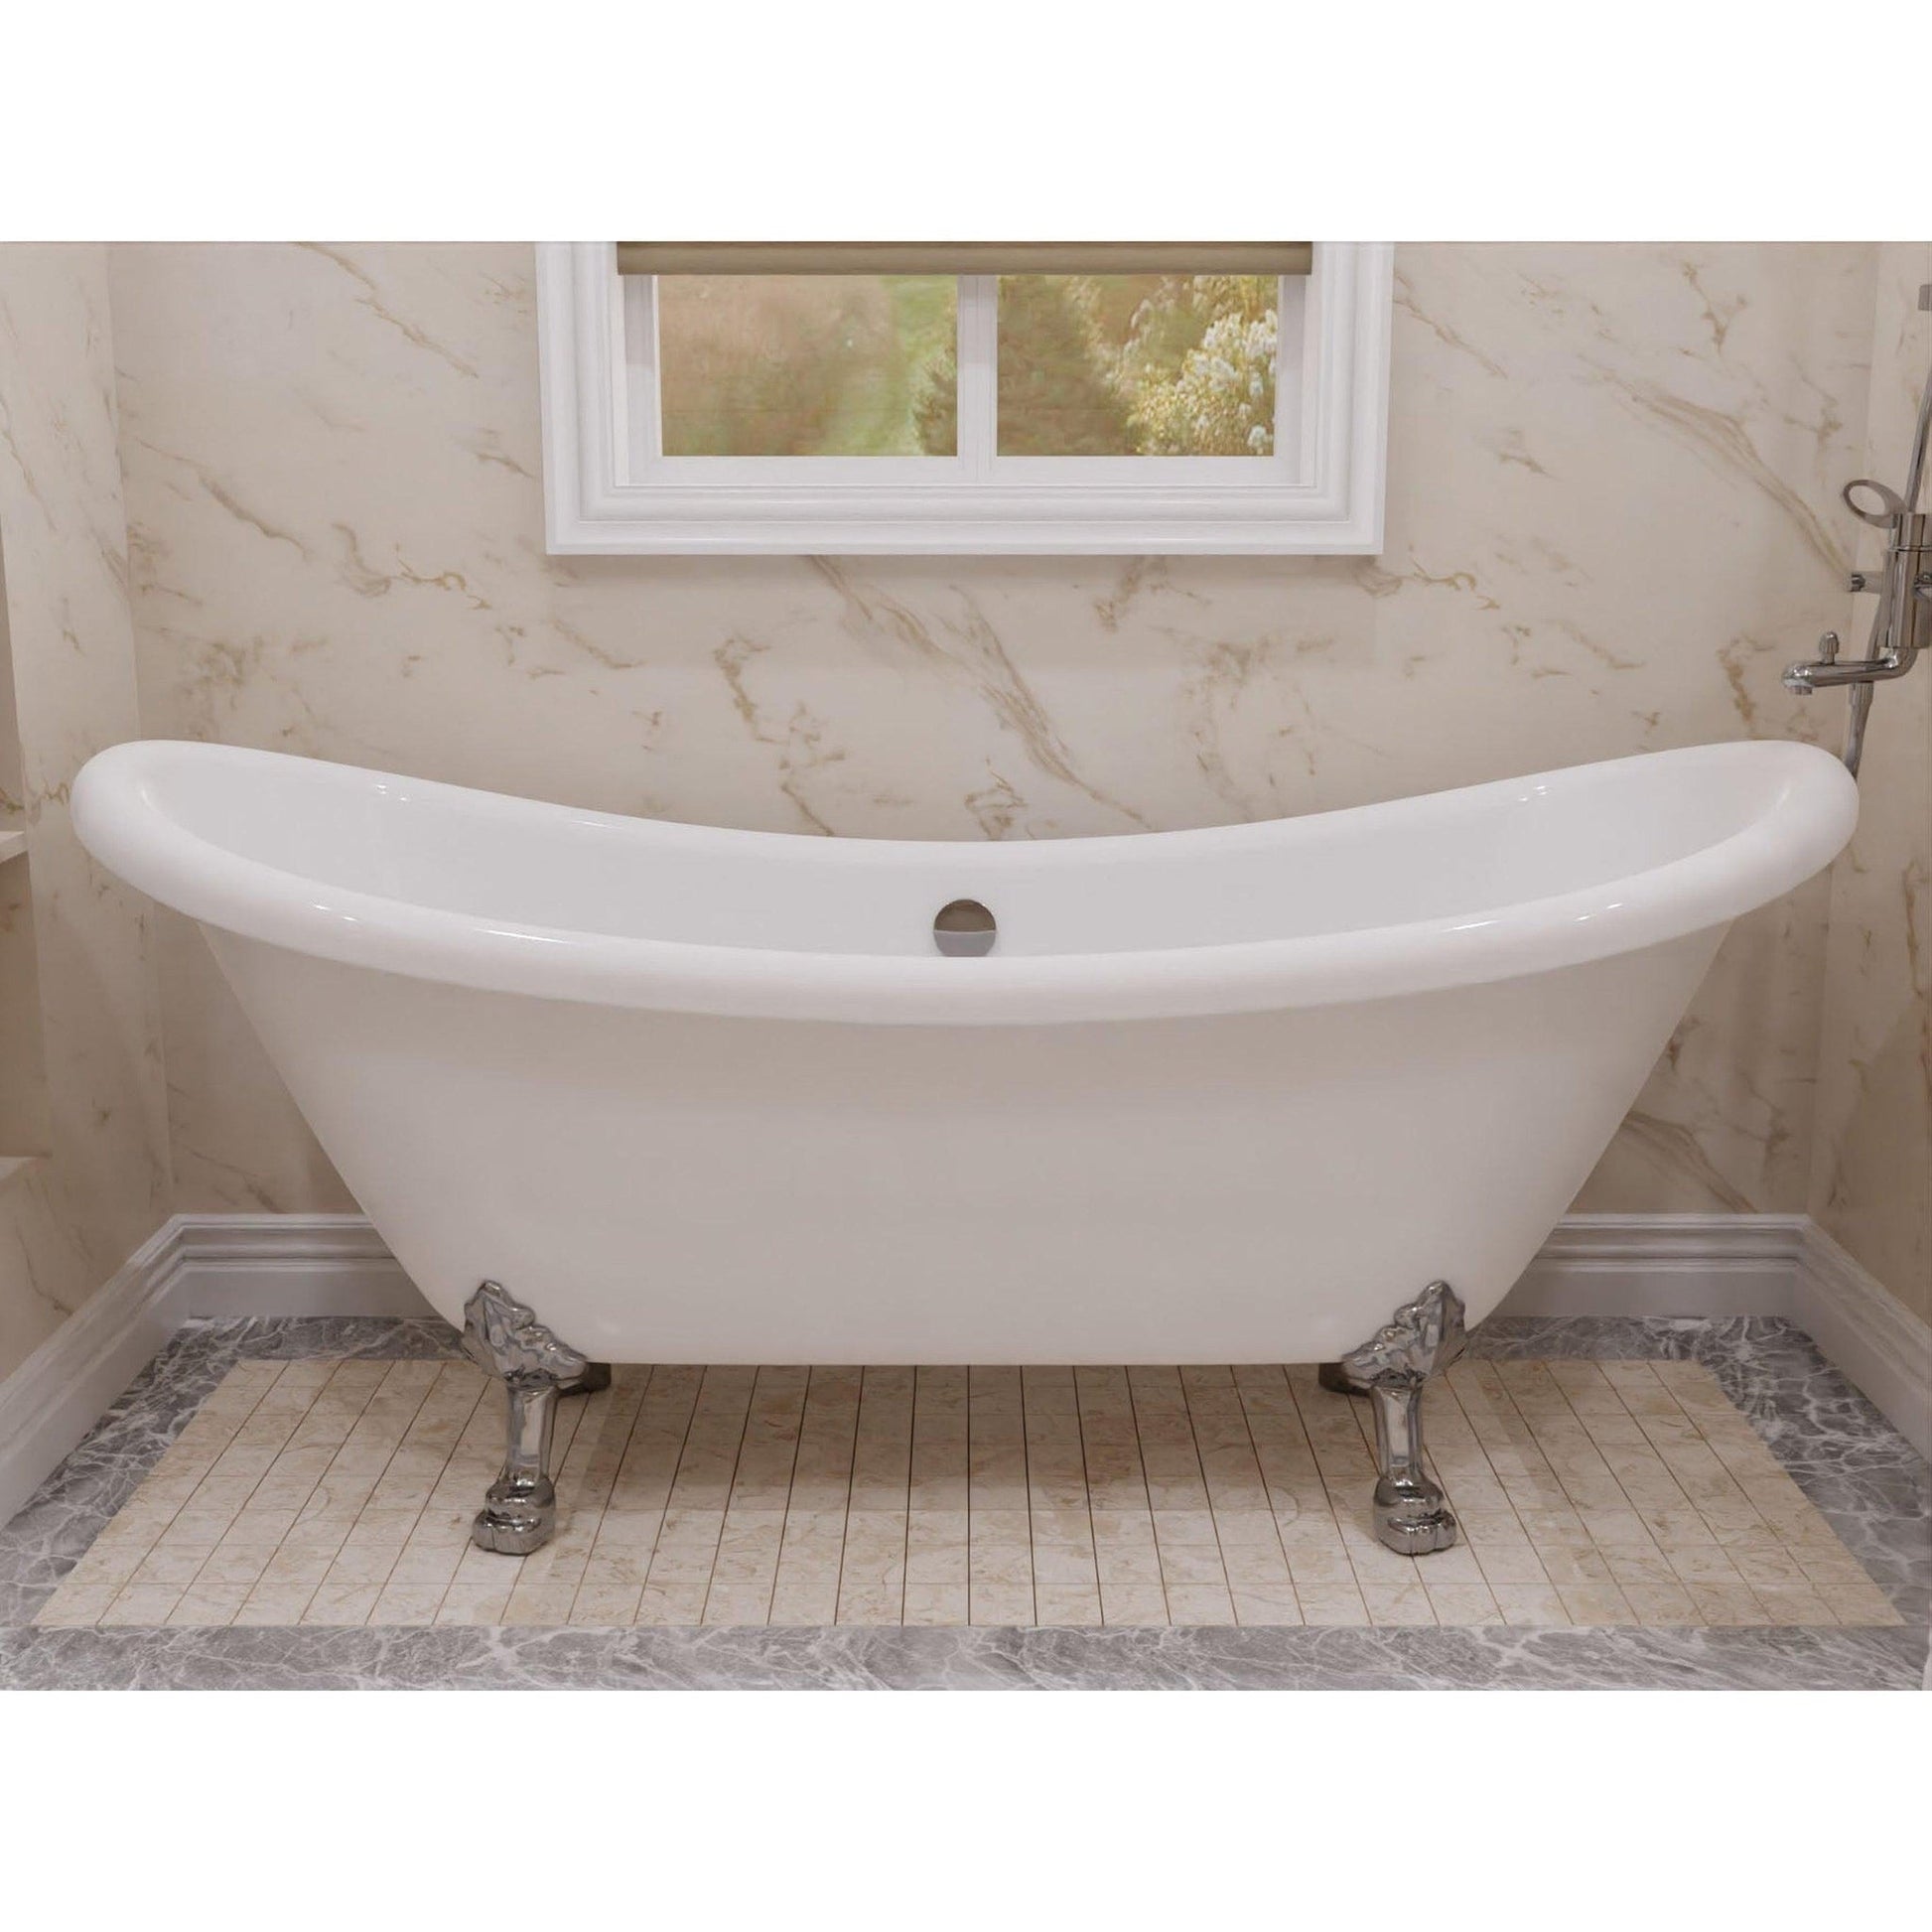 ANZZI Belissima Series 69" x 28" Freestanding Glossy White in Lion's Paw Claw Feet Style Bathtub With Built-In Overflow